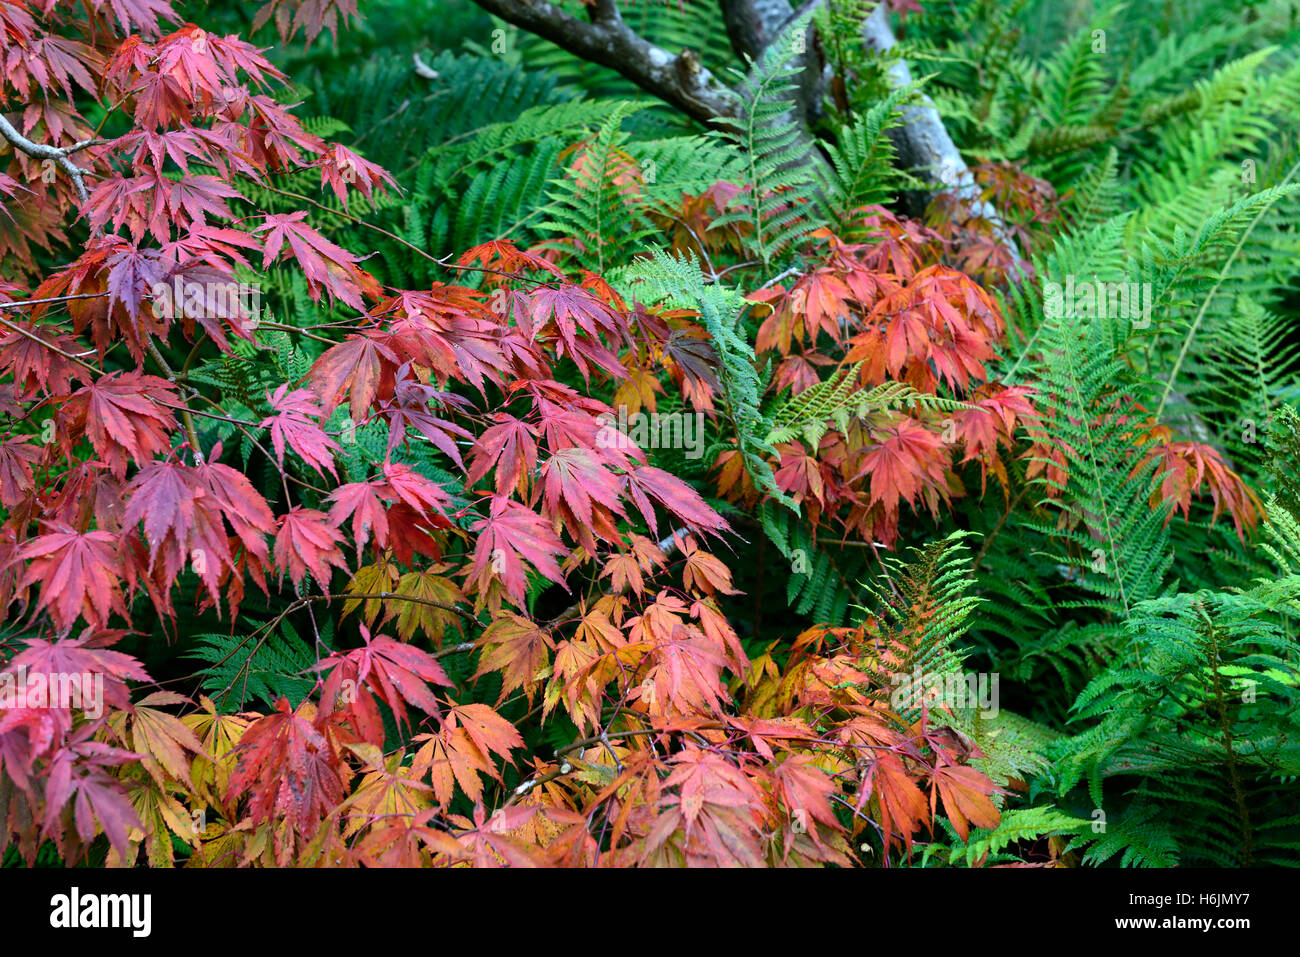 autumn fall leaves foliage red orange yellow tree trees fern green contrast contrasting combination RM Floral Stock Photo